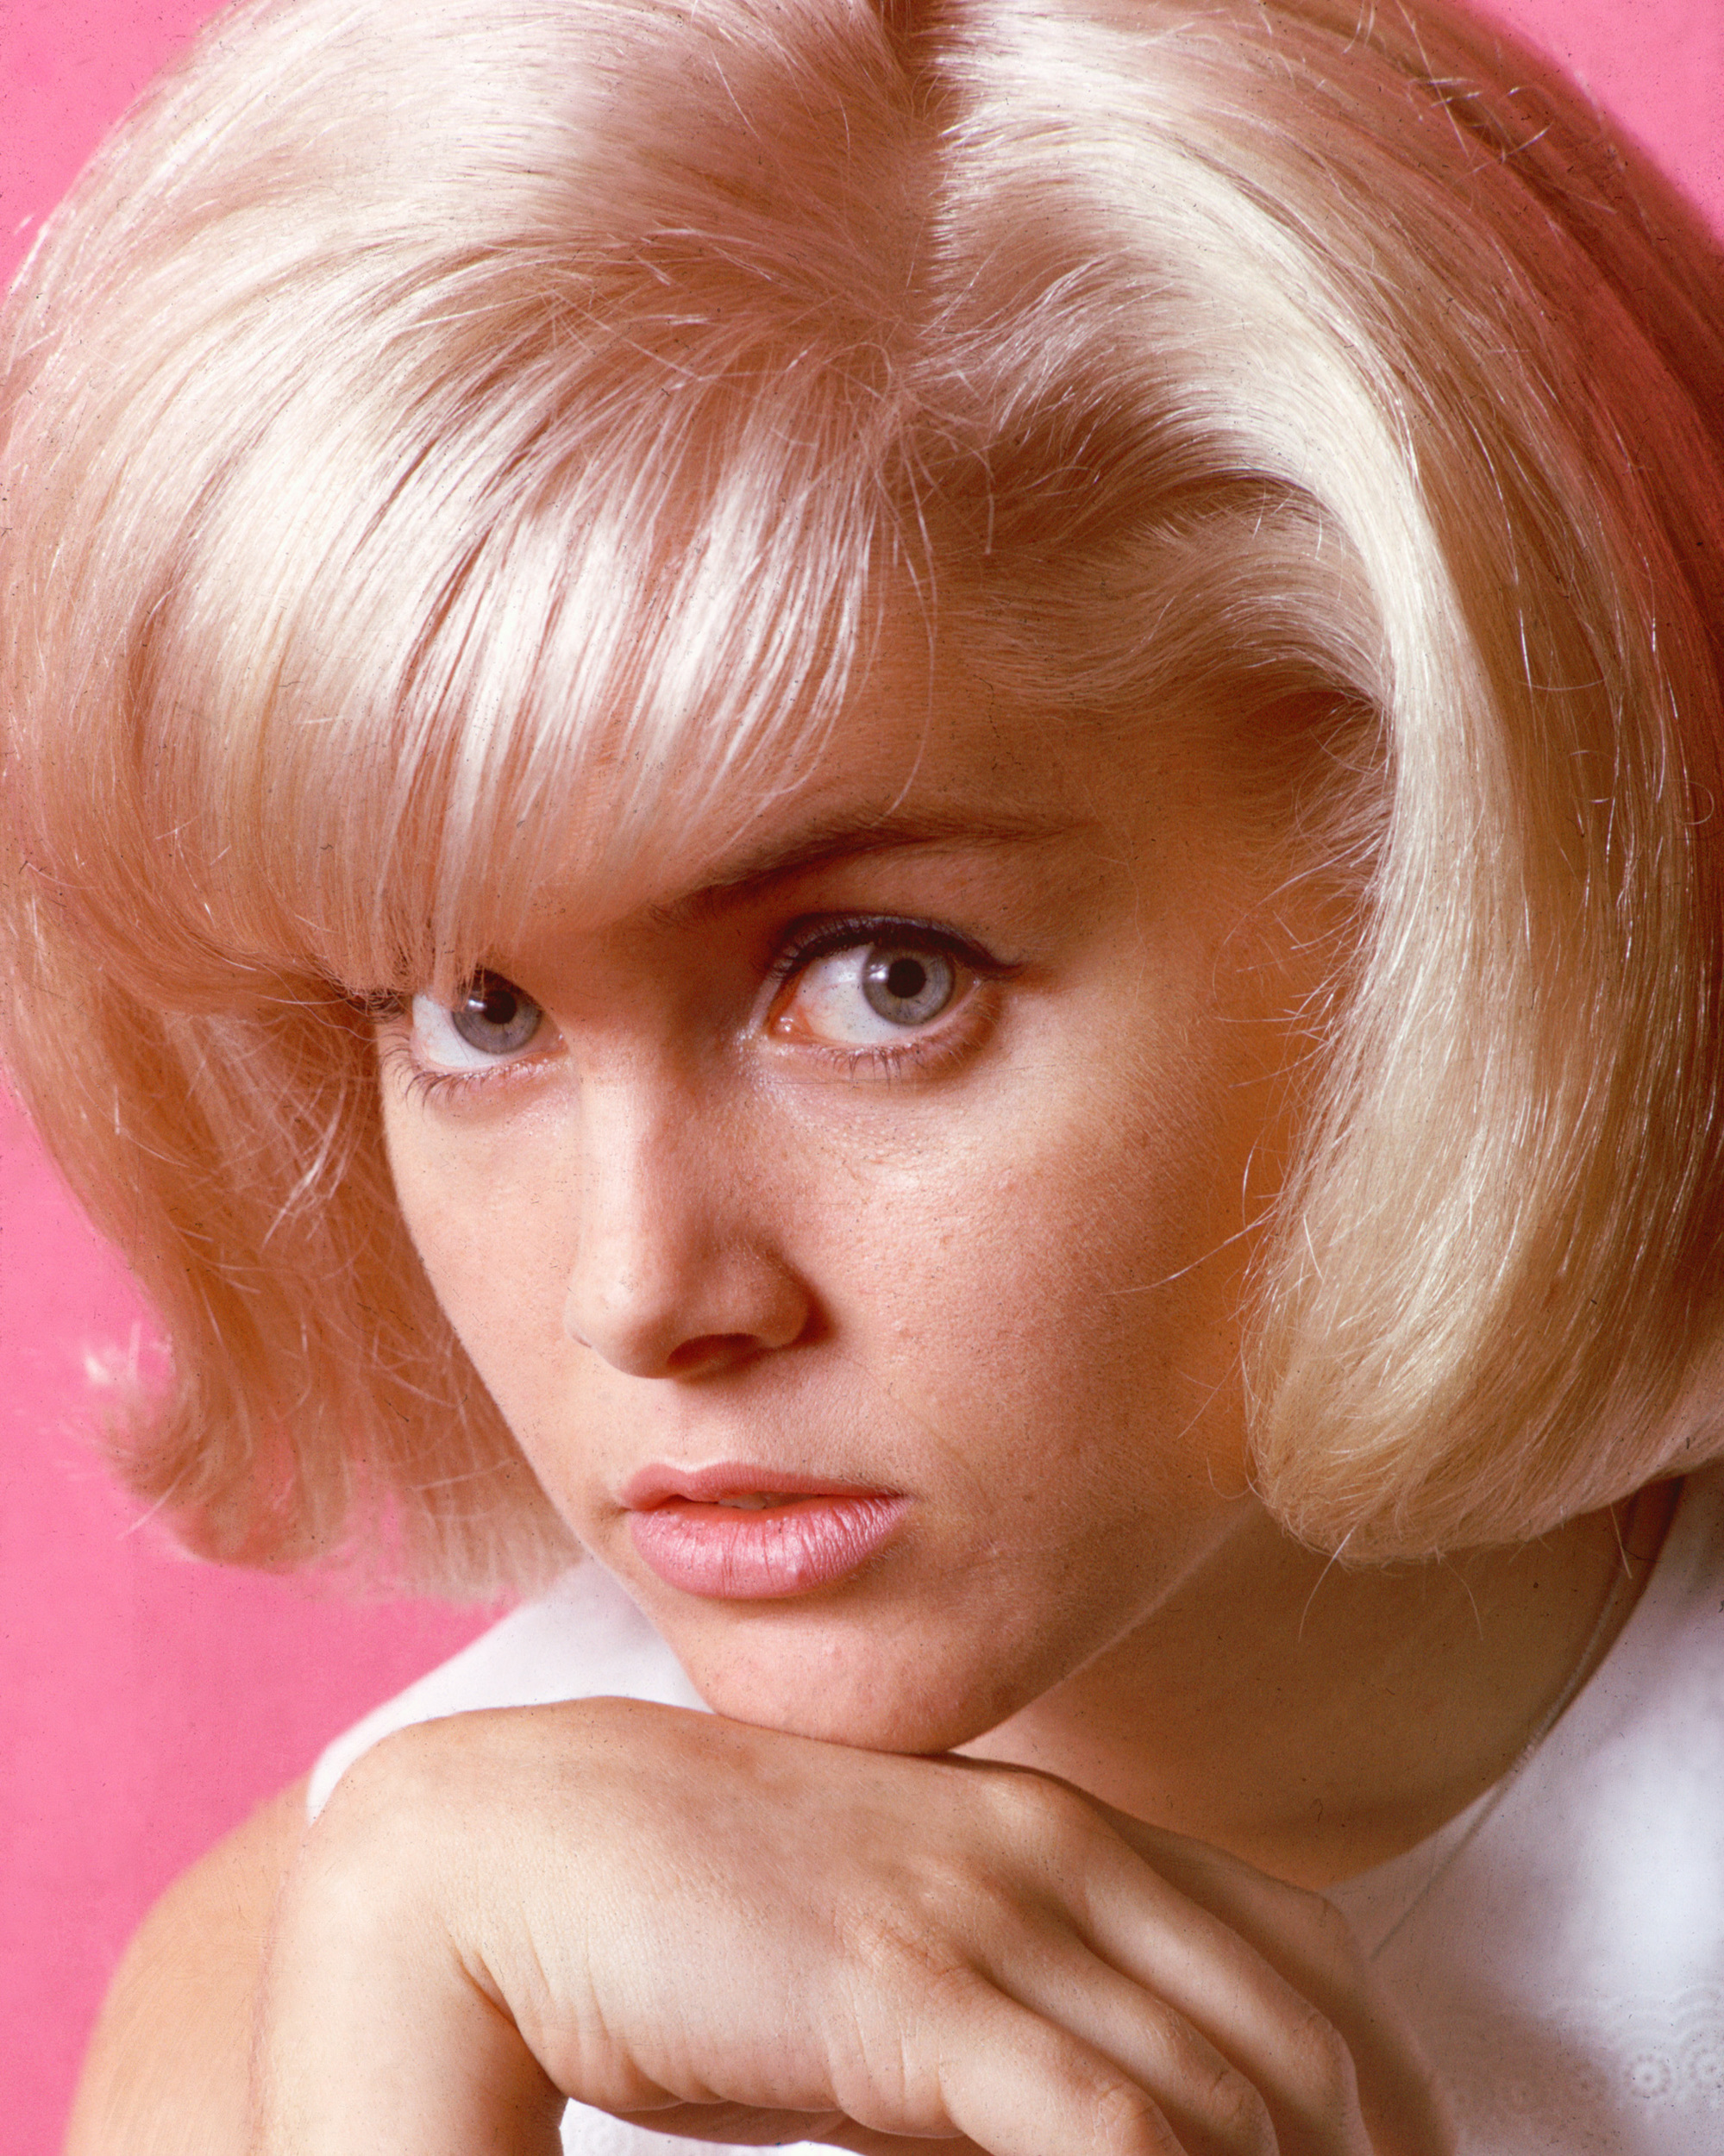 People 1999x2500 women actress blonde Sue Lyon film grain vintage old photos short hair face looking at viewer hands pink background portrait display closeup